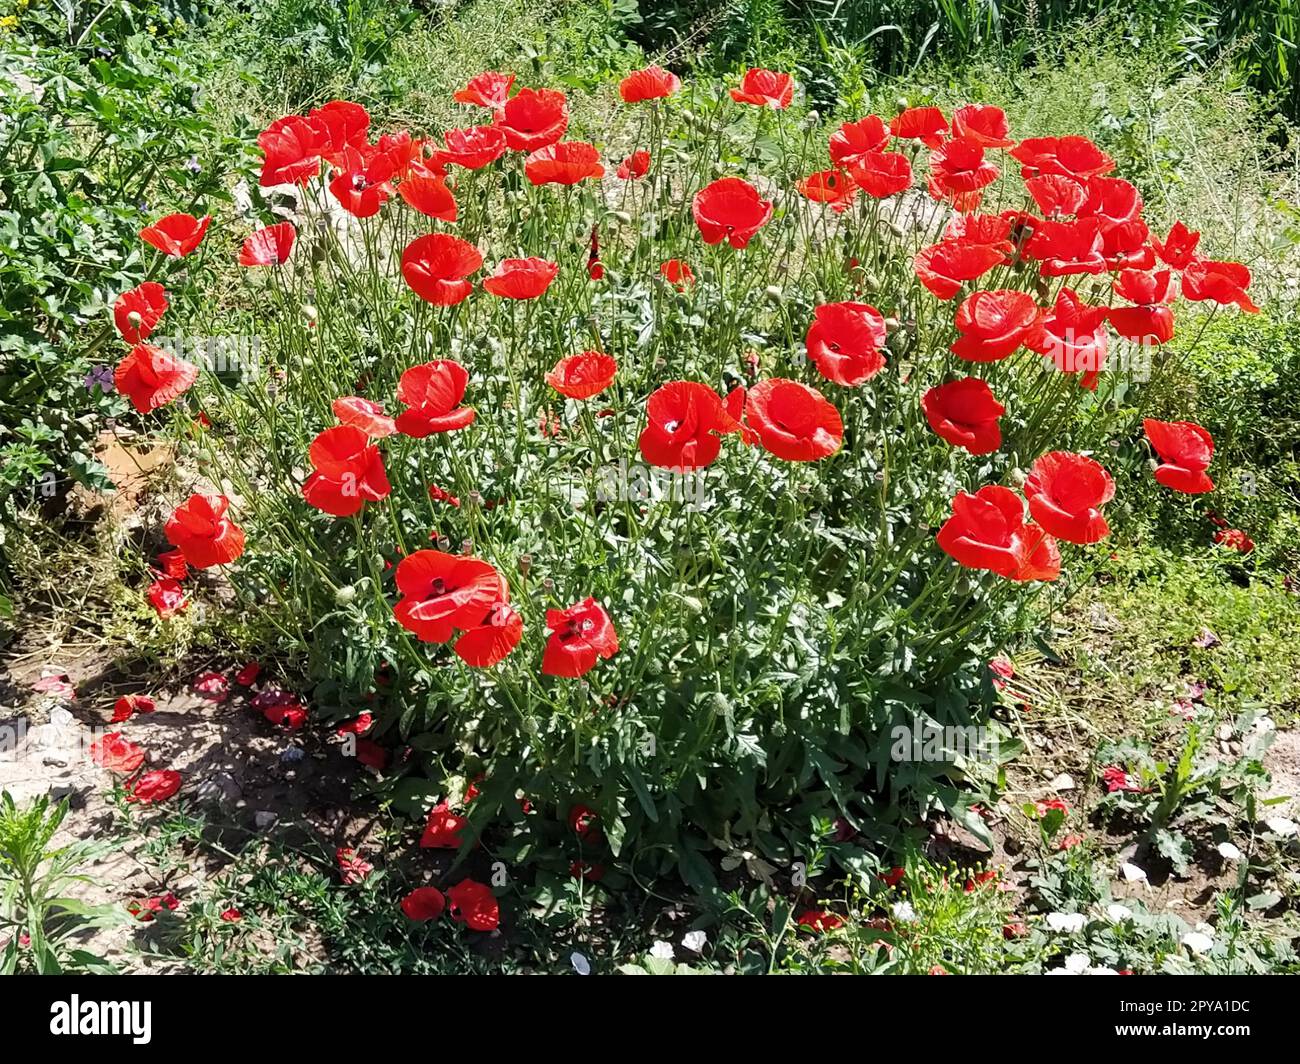 Blooming red poppy flowers on the side against a blue sky. Source of opium. Wild flowers on the field. Gentle poppy petals glistening in the bright sun. The wind blows flowers Stock Photo